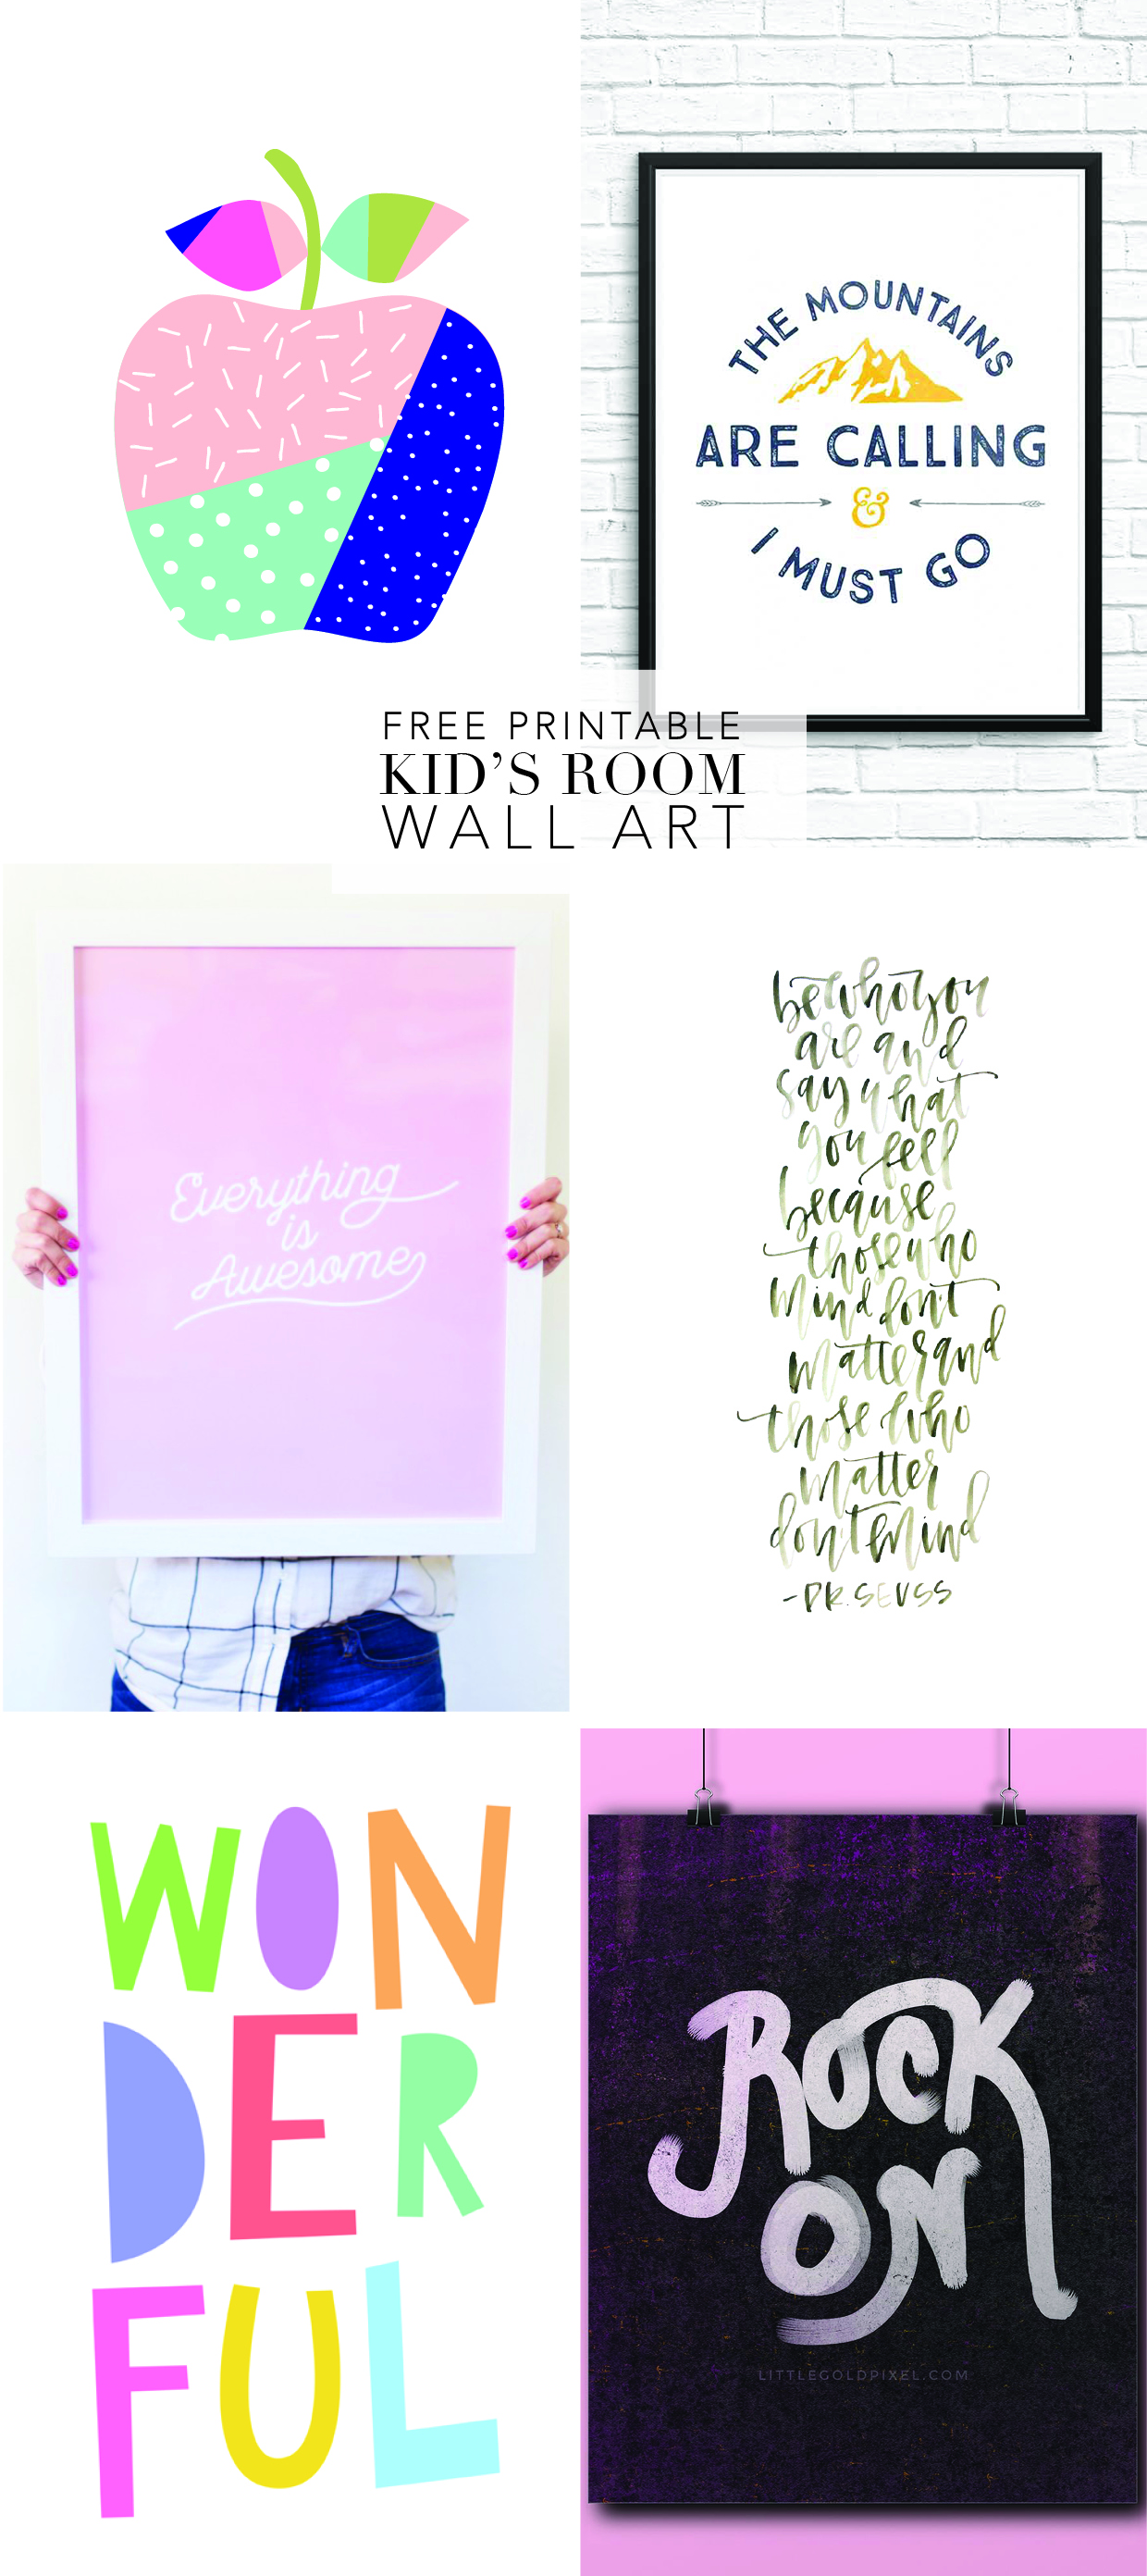 Free Printable Wall Art for Kid’s Rooms